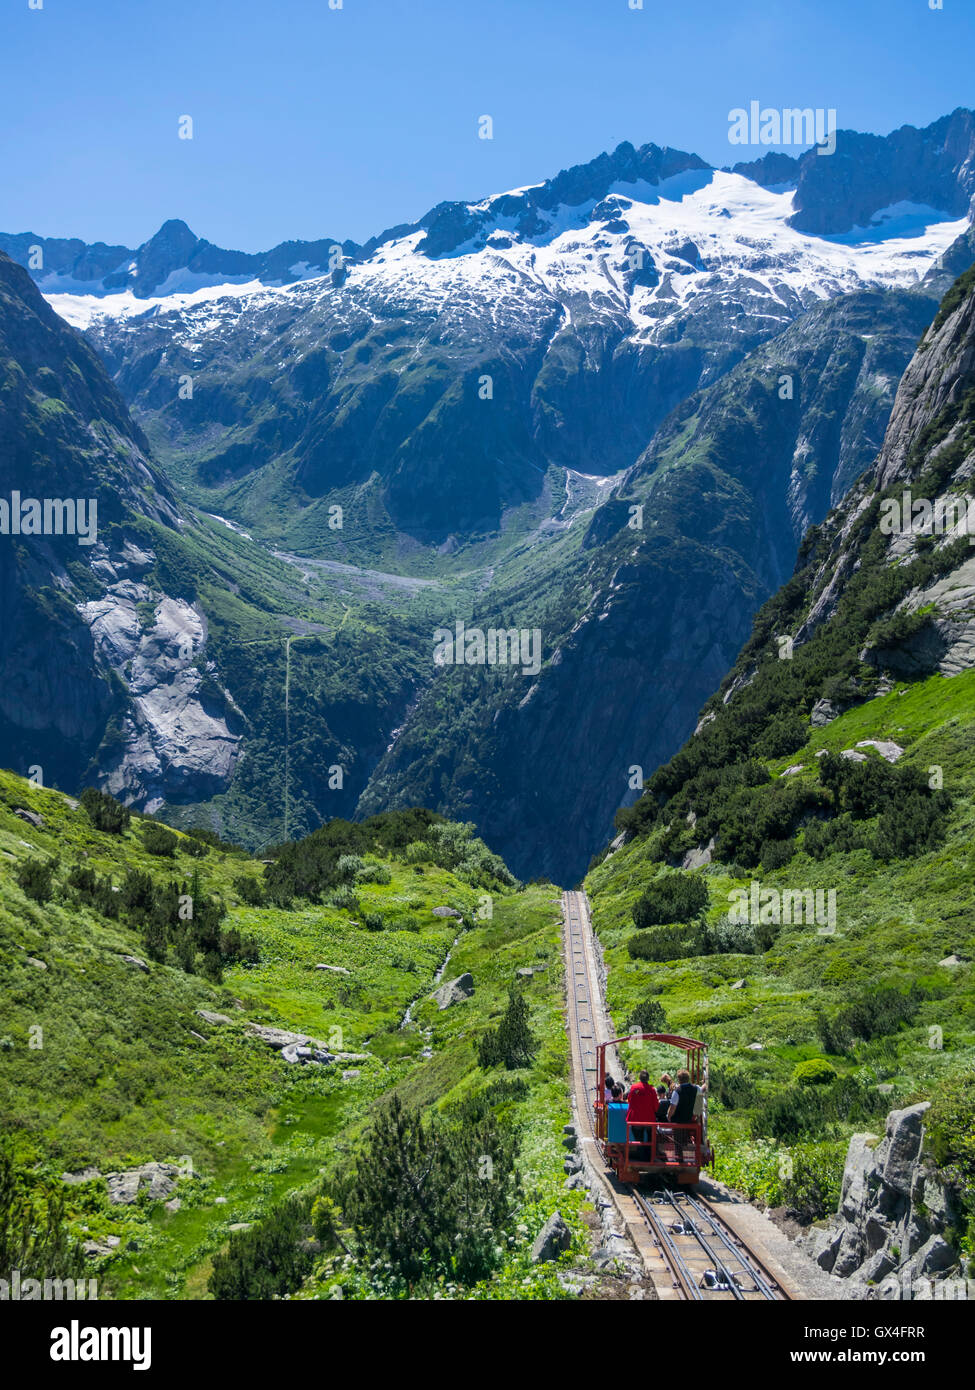 Gelmerbahn funicular in the Swiss Alps. One of the steepest funiculars in the world with a maximum inclination of 106%. Stock Photo